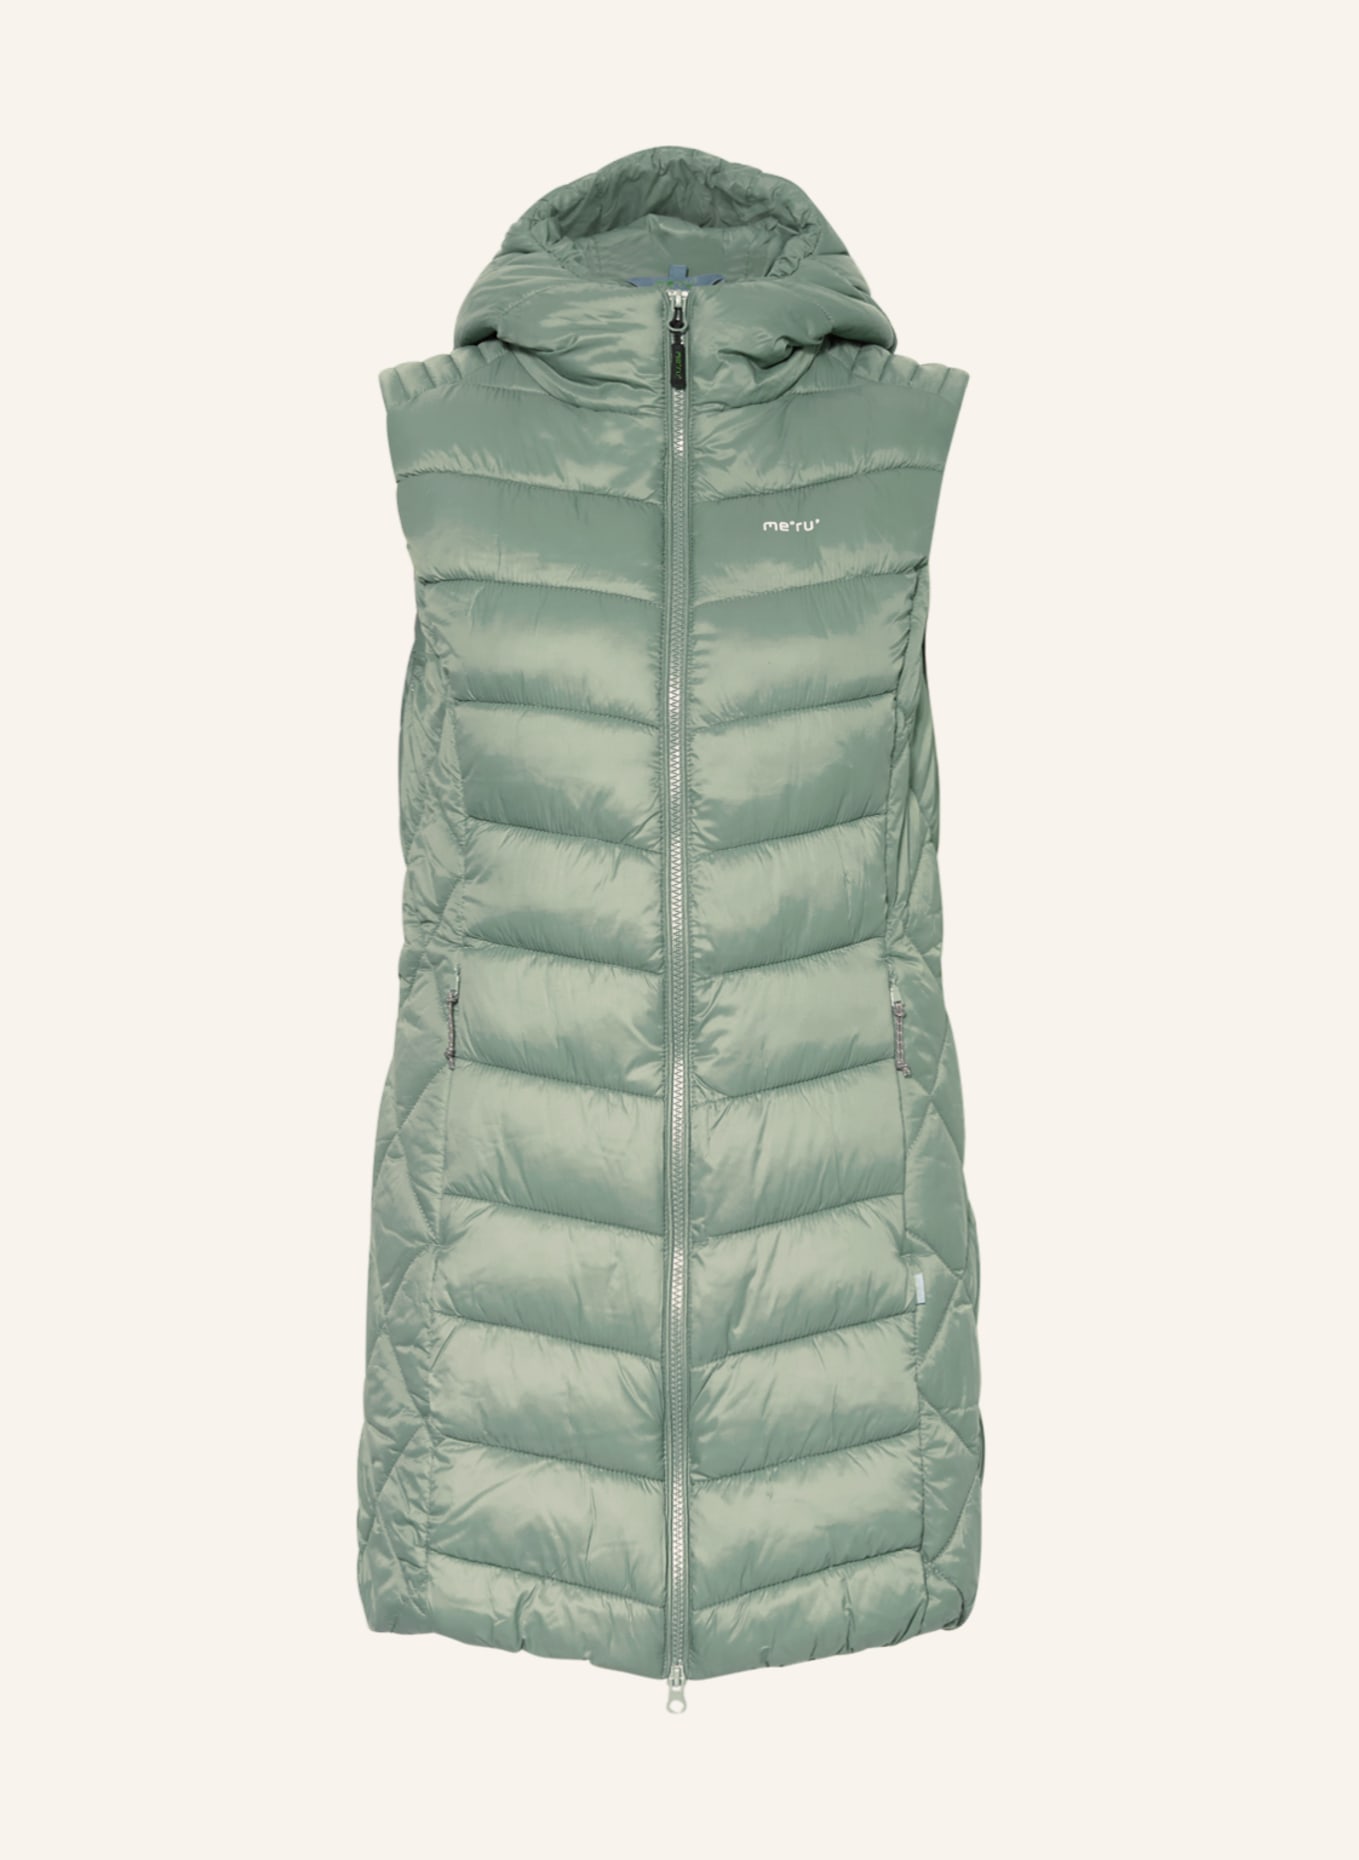 me°ru' Quilted vest RUSSELL, Color: LIGHT GREEN (Image 1)